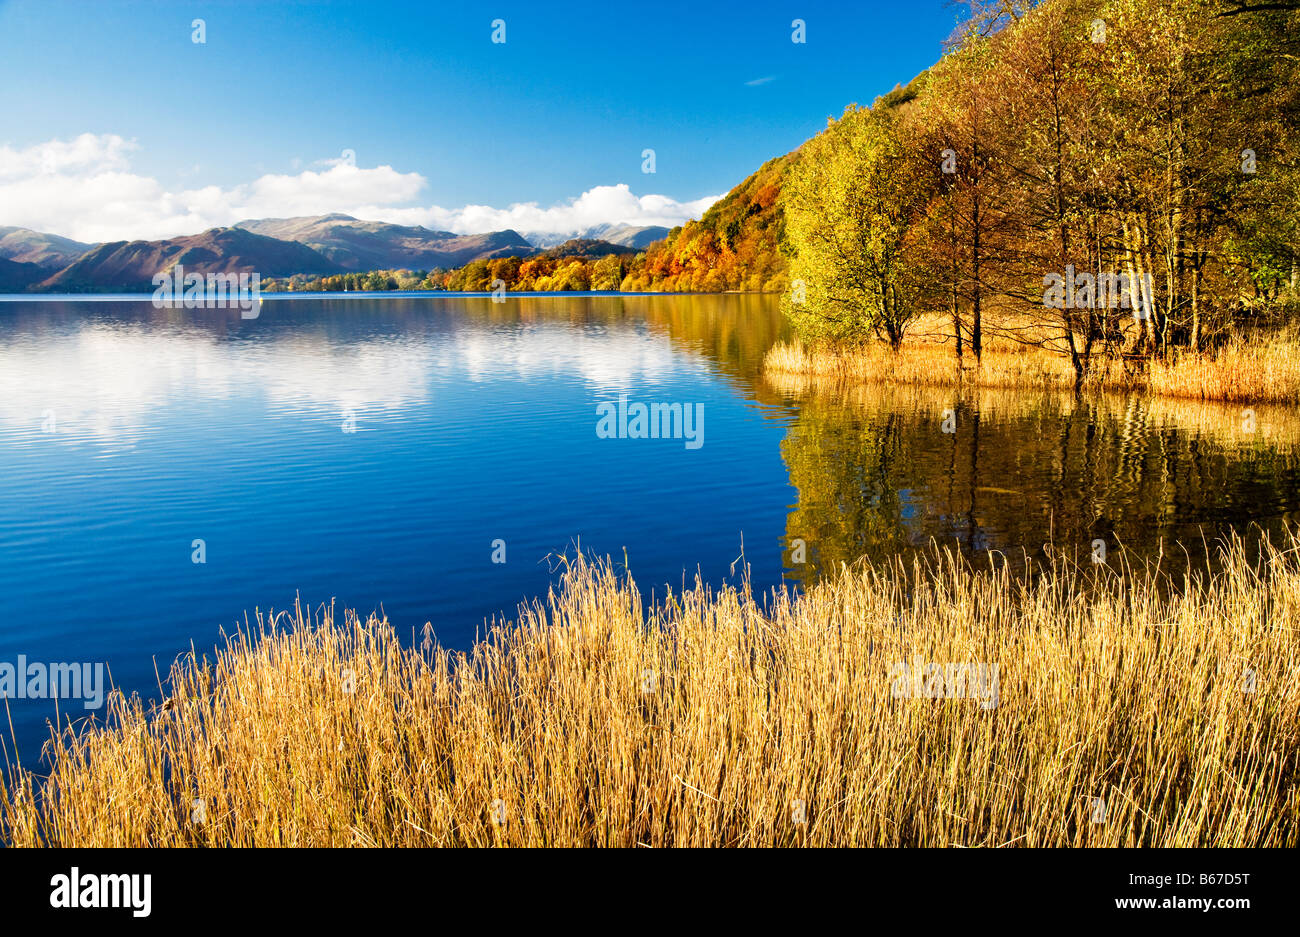 A sunny autumn day on the shores of Ullswater in the Lake District National Park Cumbria England UK Stock Photo